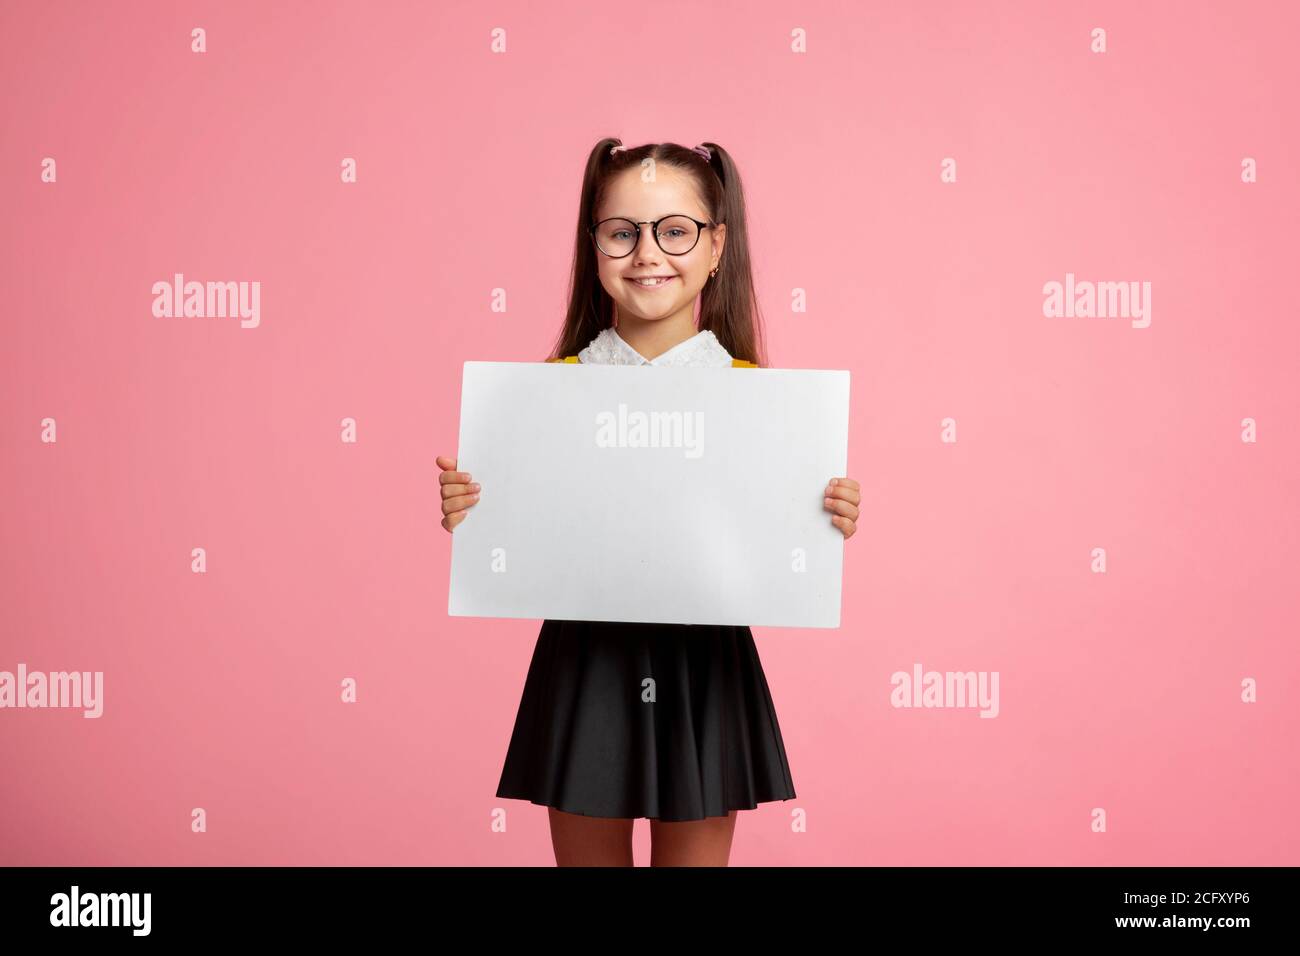 Cheerful child schoolgirl in uniform and glasses holds sign with empty space Stock Photo